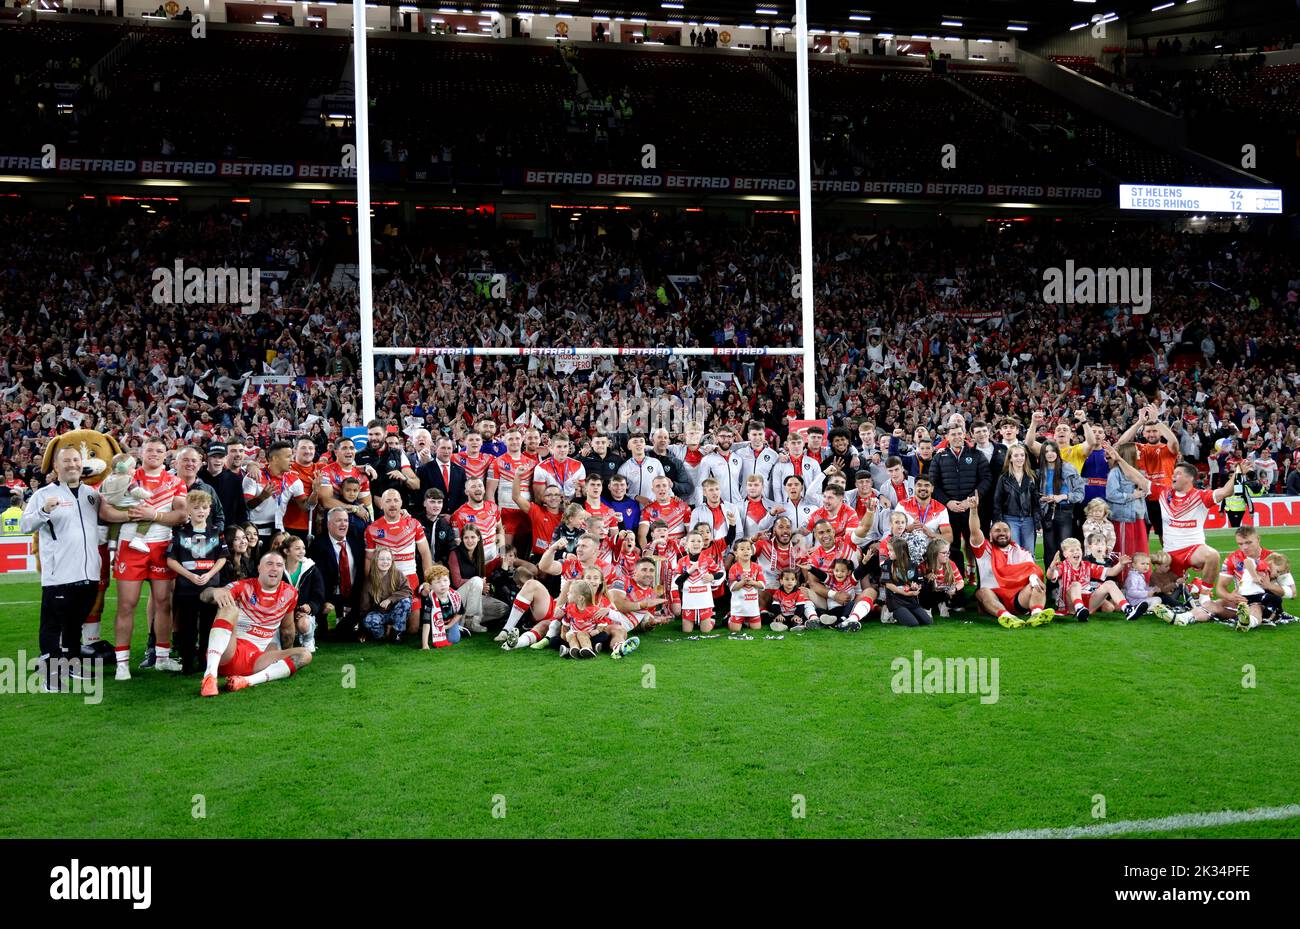 St Helens players and staff celebrate with the trophy after victory in the Betfred Super League Grand Final at Old Trafford, Manchester. Picture date: Saturday September 24, 2022. Stock Photo